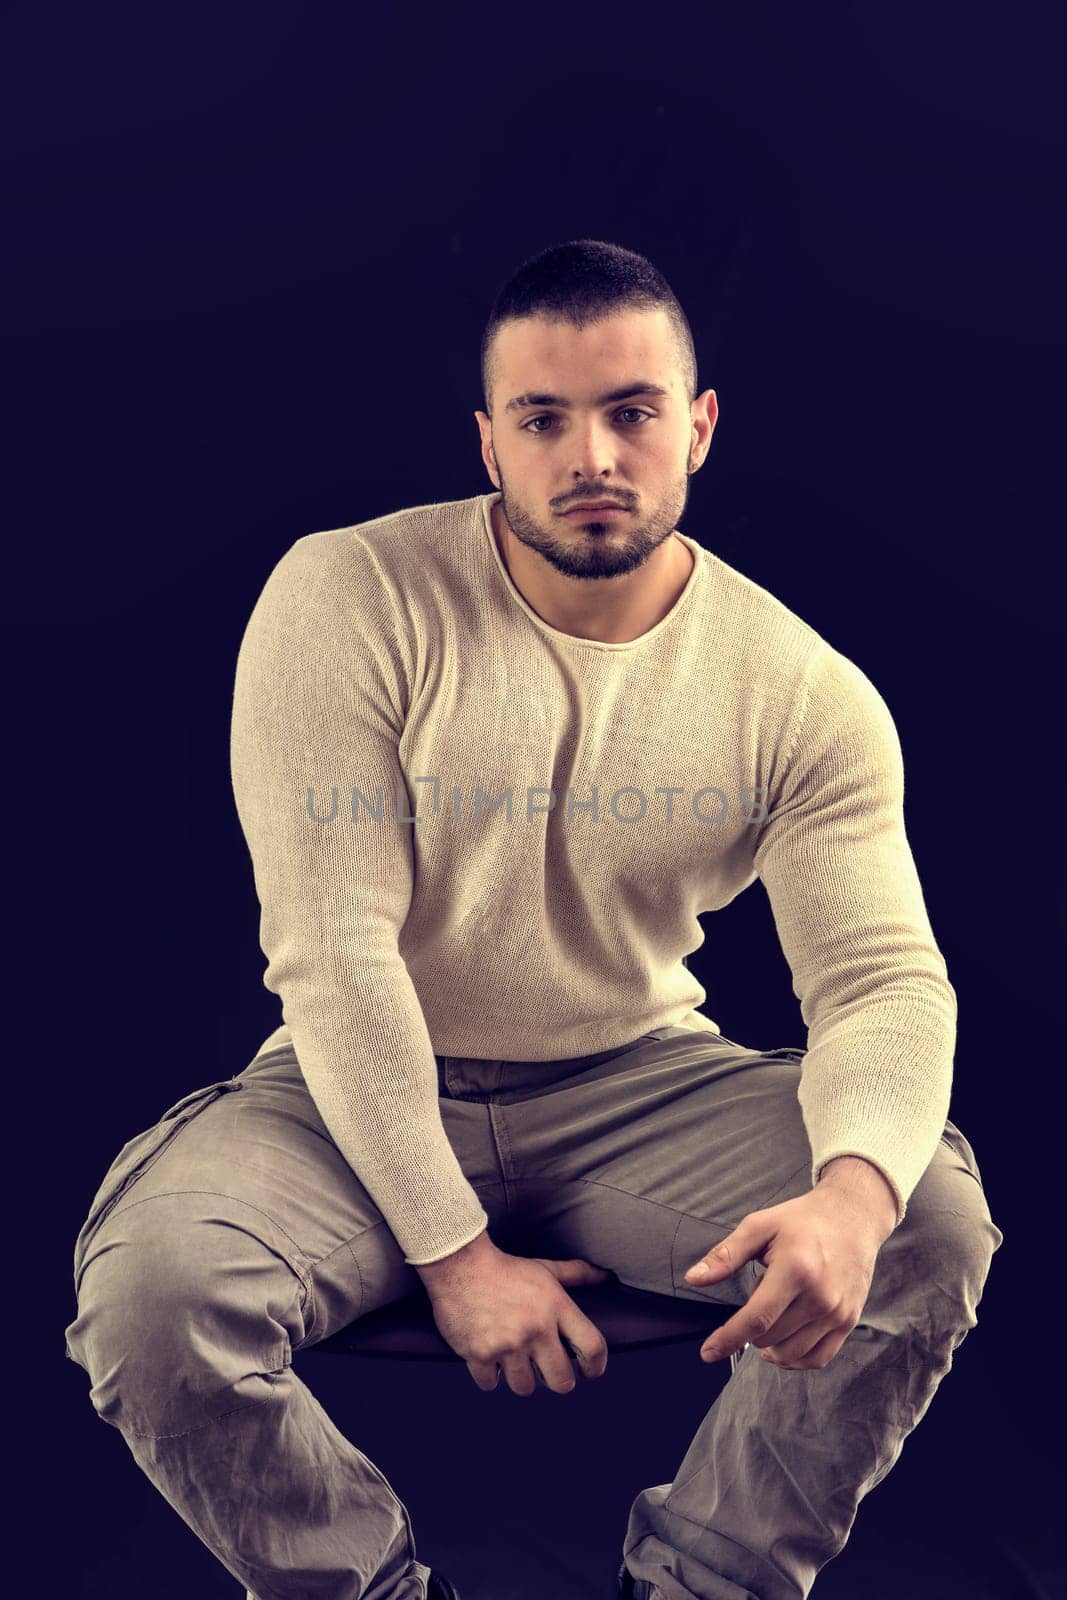 Photo of a man with a relaxed posture sitting on a stool by artofphoto